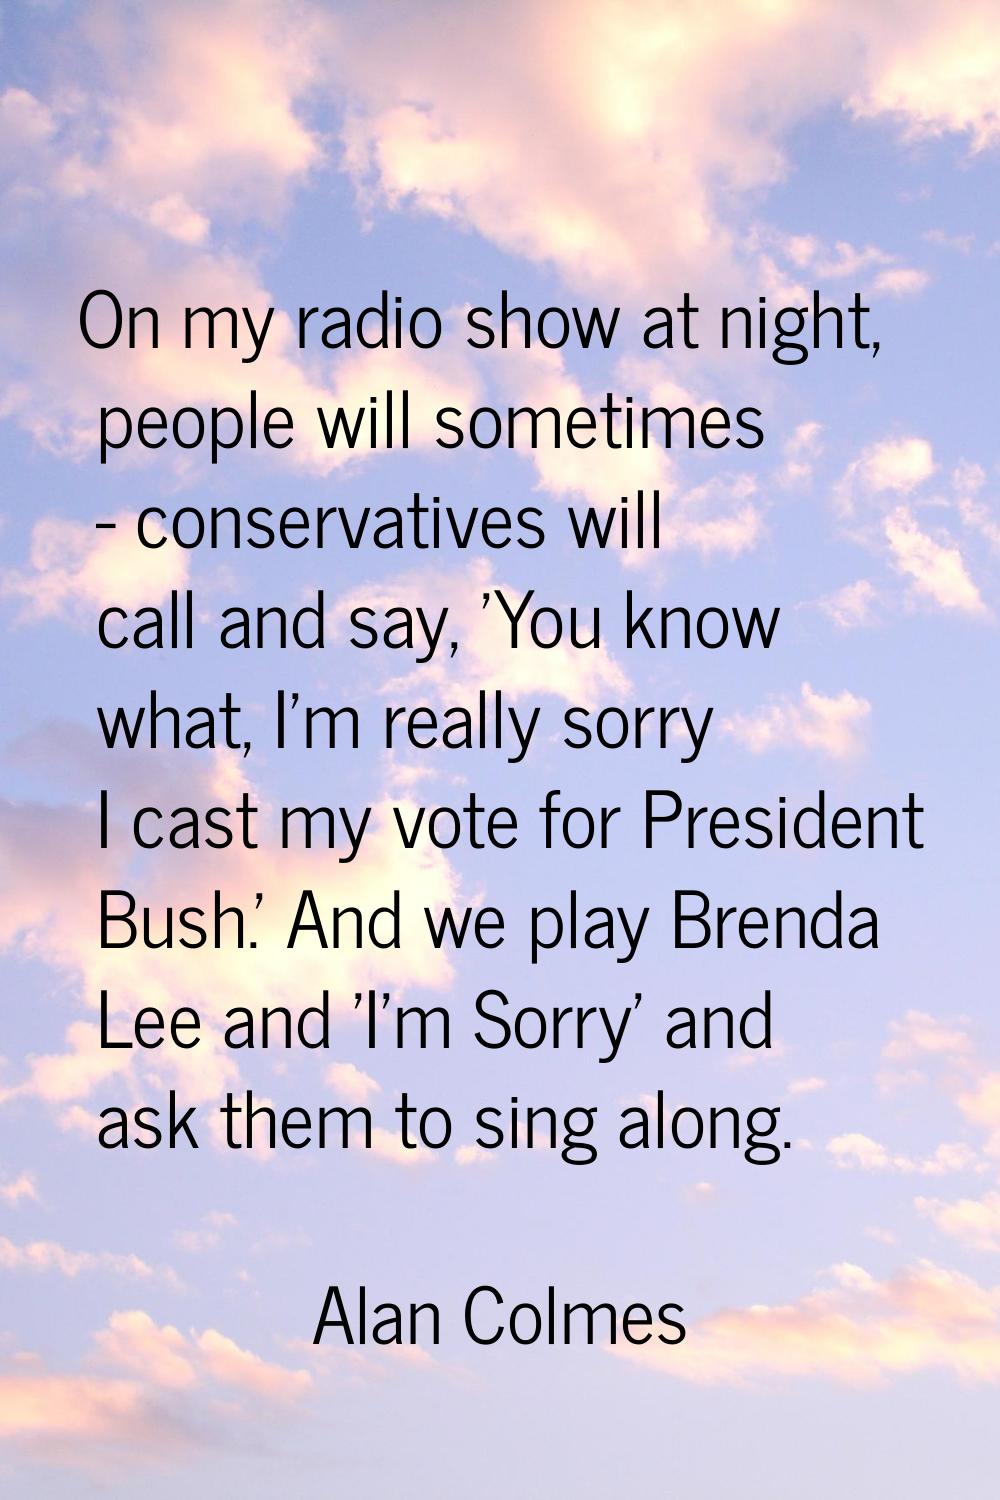 On my radio show at night, people will sometimes - conservatives will call and say, 'You know what,